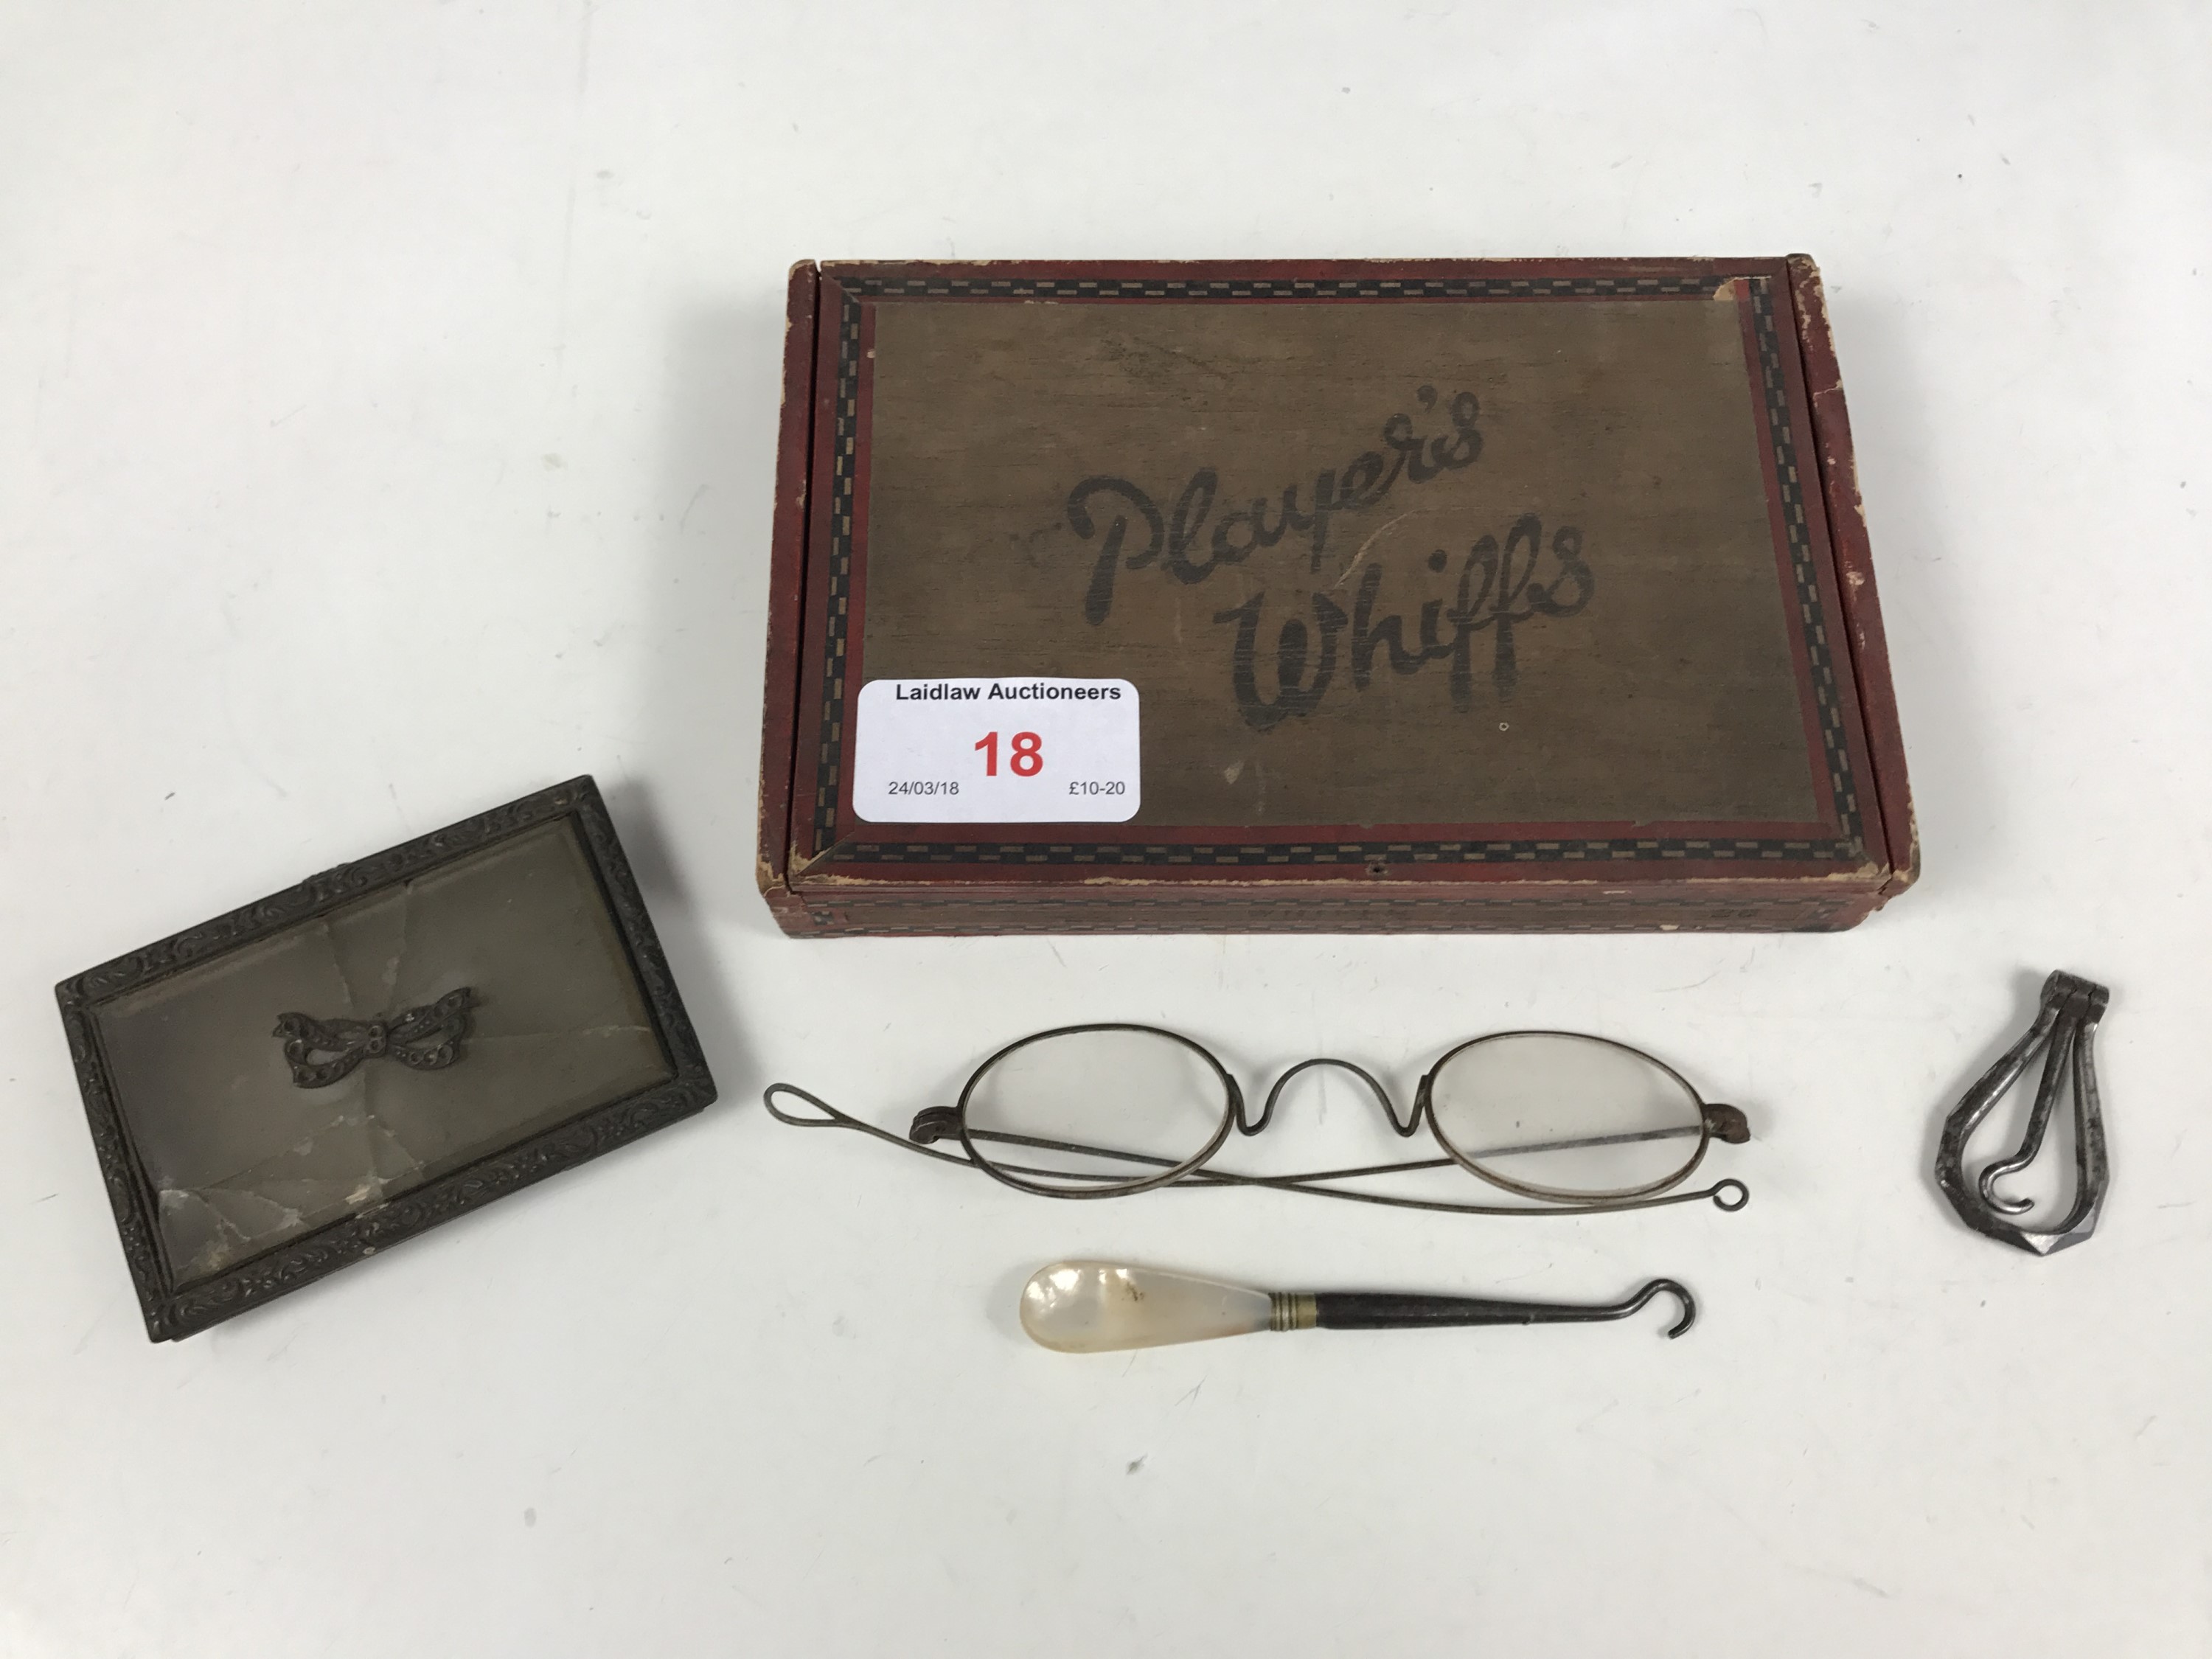 Sundry collectors' items, including 19th Century spectacles and a faceted steel glove hook etc